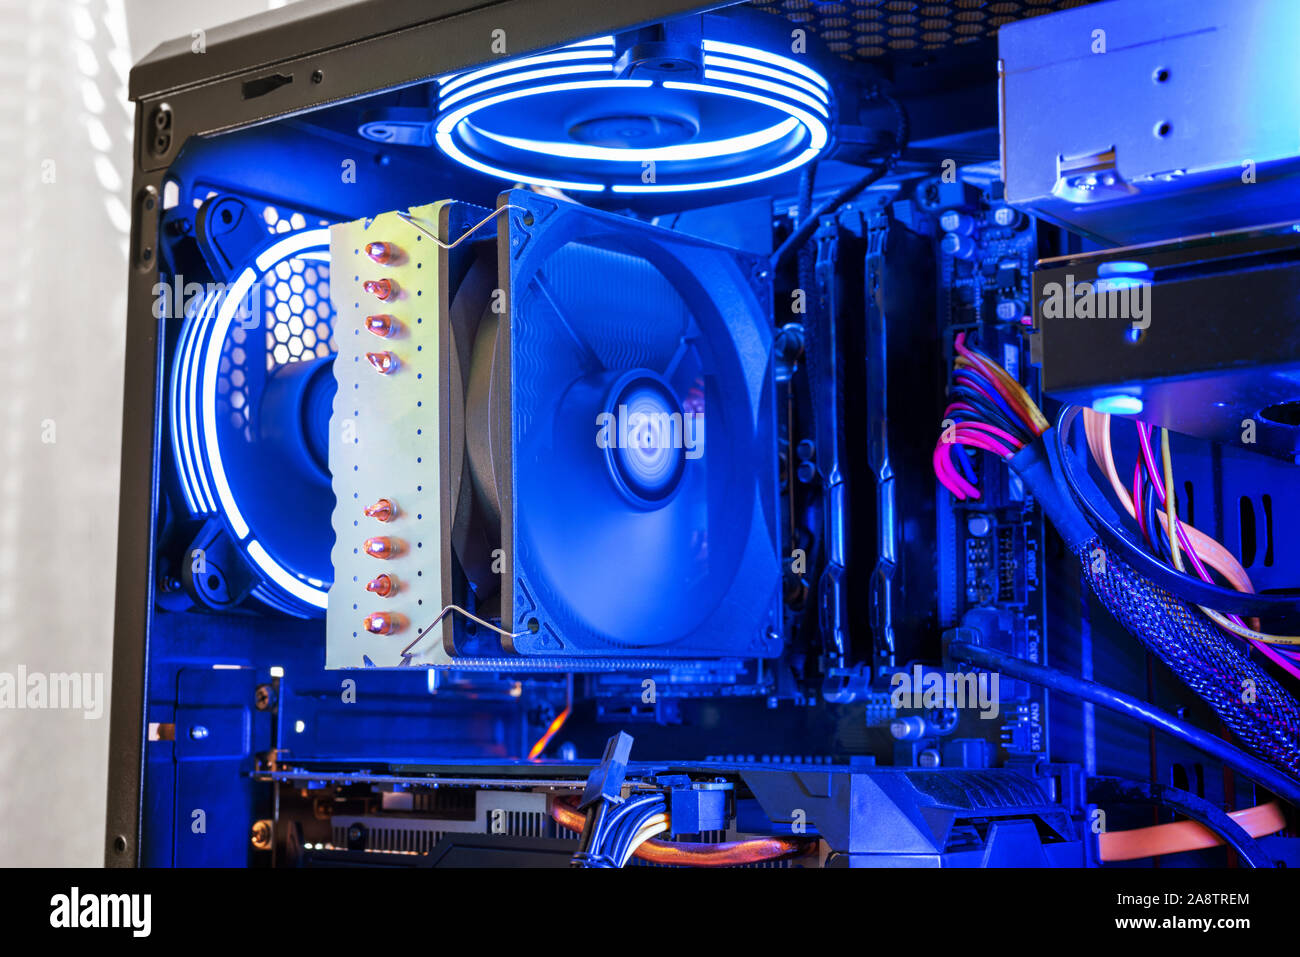 Large processor cooler on a modern gaming computer with RGB illumination. Detail of processor, memory, graphics card and coolers. Stock Photo